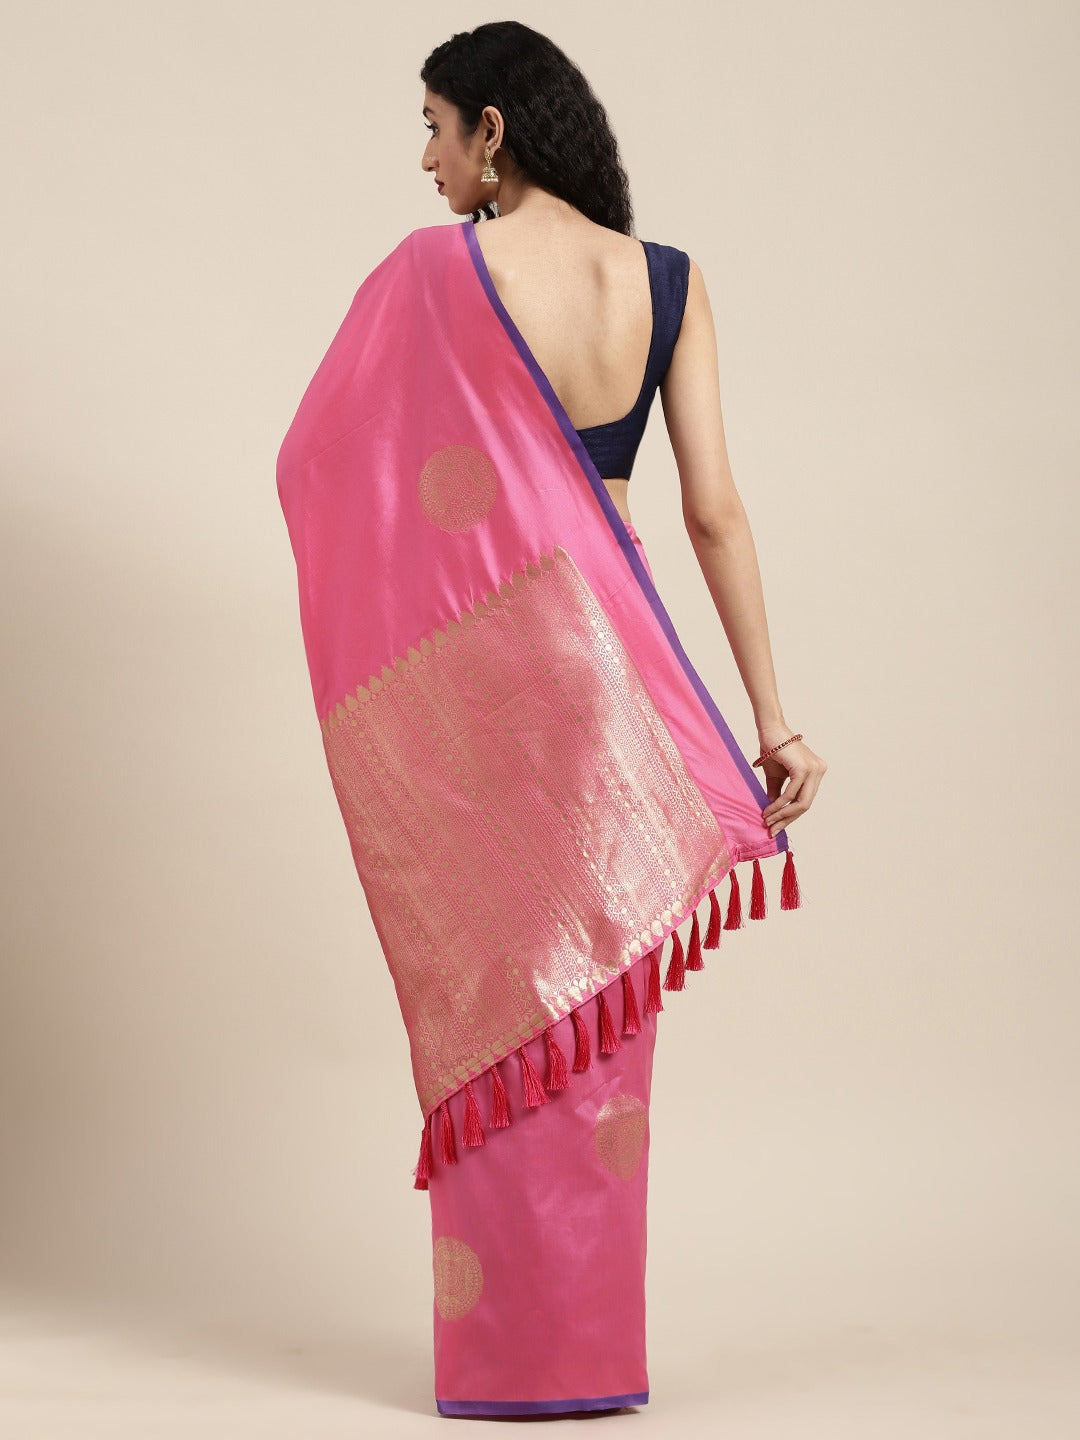 The saree boasts a rich Banarasi woven design, meticulously crafted by skilled artisans.